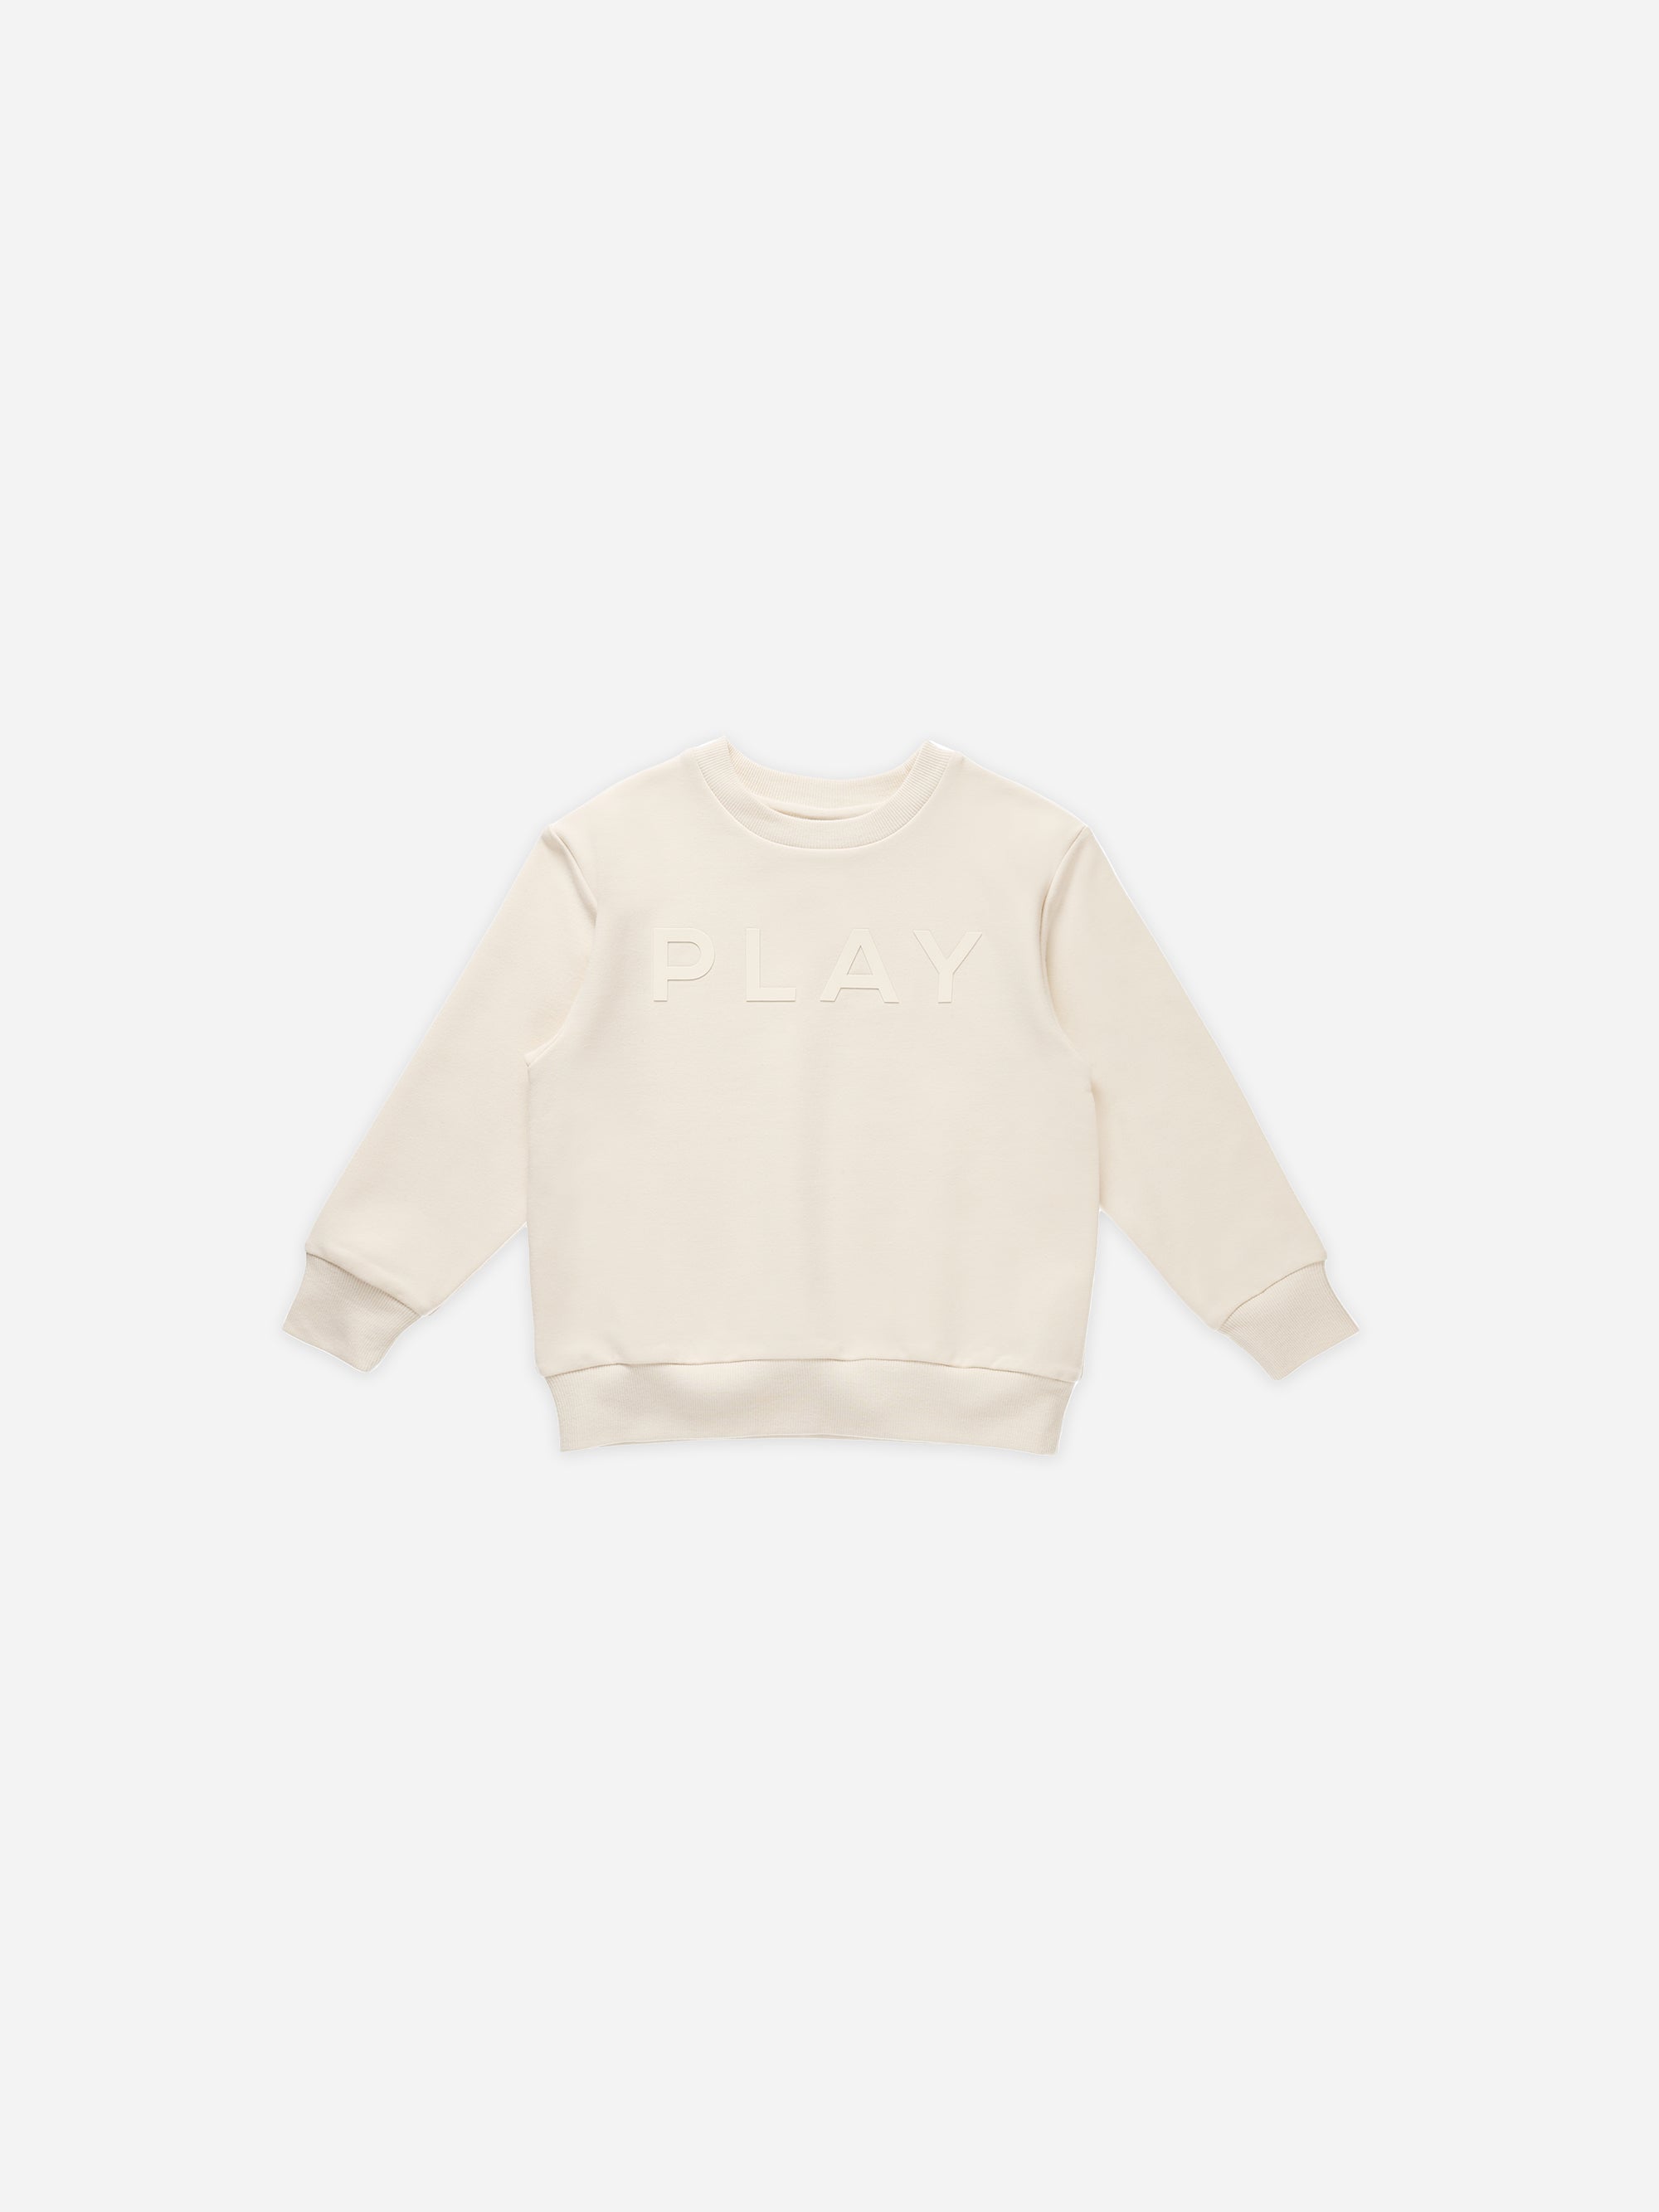 Dawn Patrol Pullover || Natural - Rylee + Cru | Kids Clothes | Trendy Baby Clothes | Modern Infant Outfits |